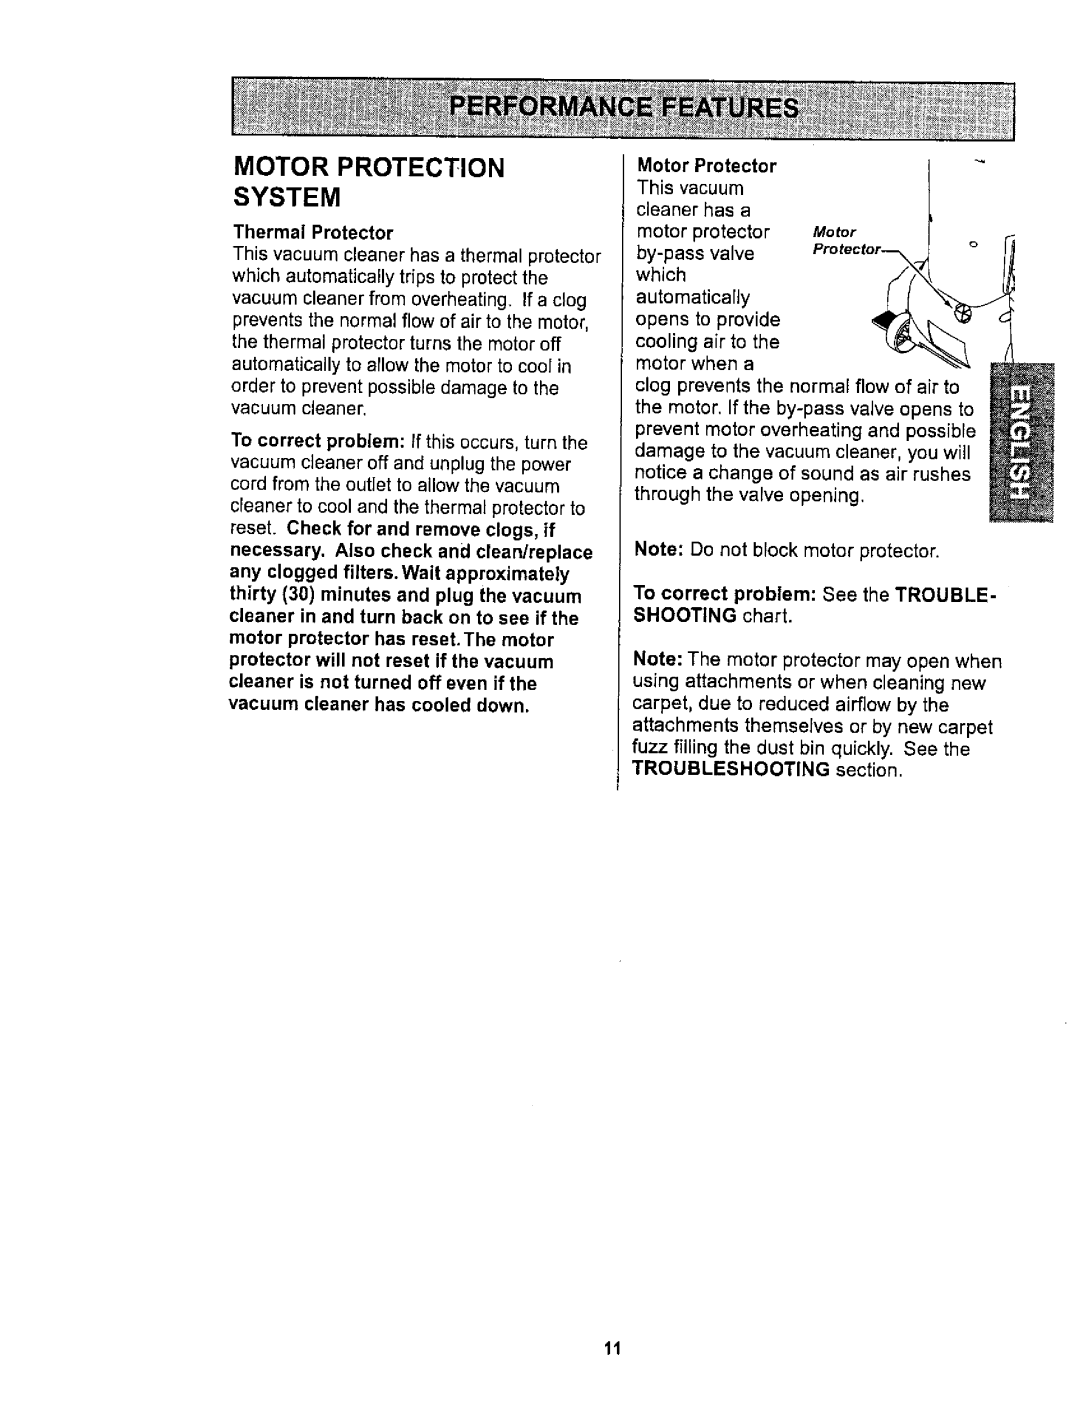 Kenmore 116.36722 owner manual Motor Protection System, Thermal Protector, Motor Protector 